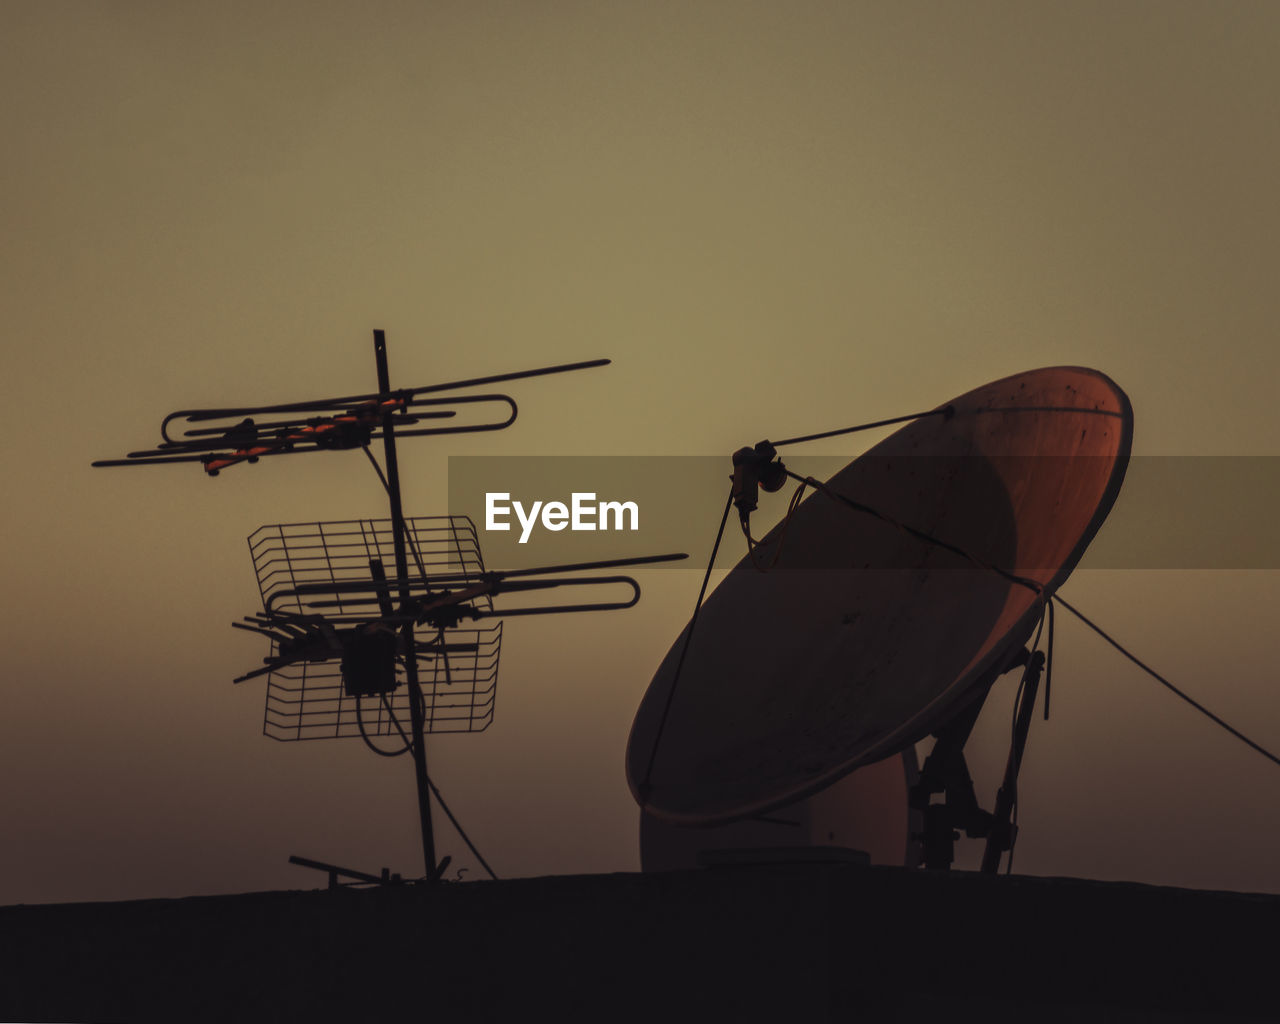 antenna, satellite, satellite dish, television antenna, technology, telecommunications engineering, broadcasting, communication, wireless technology, vehicle, no people, television aerial, global communications, telecommunications equipment, equipment, nature, sky, aircraft, silhouette